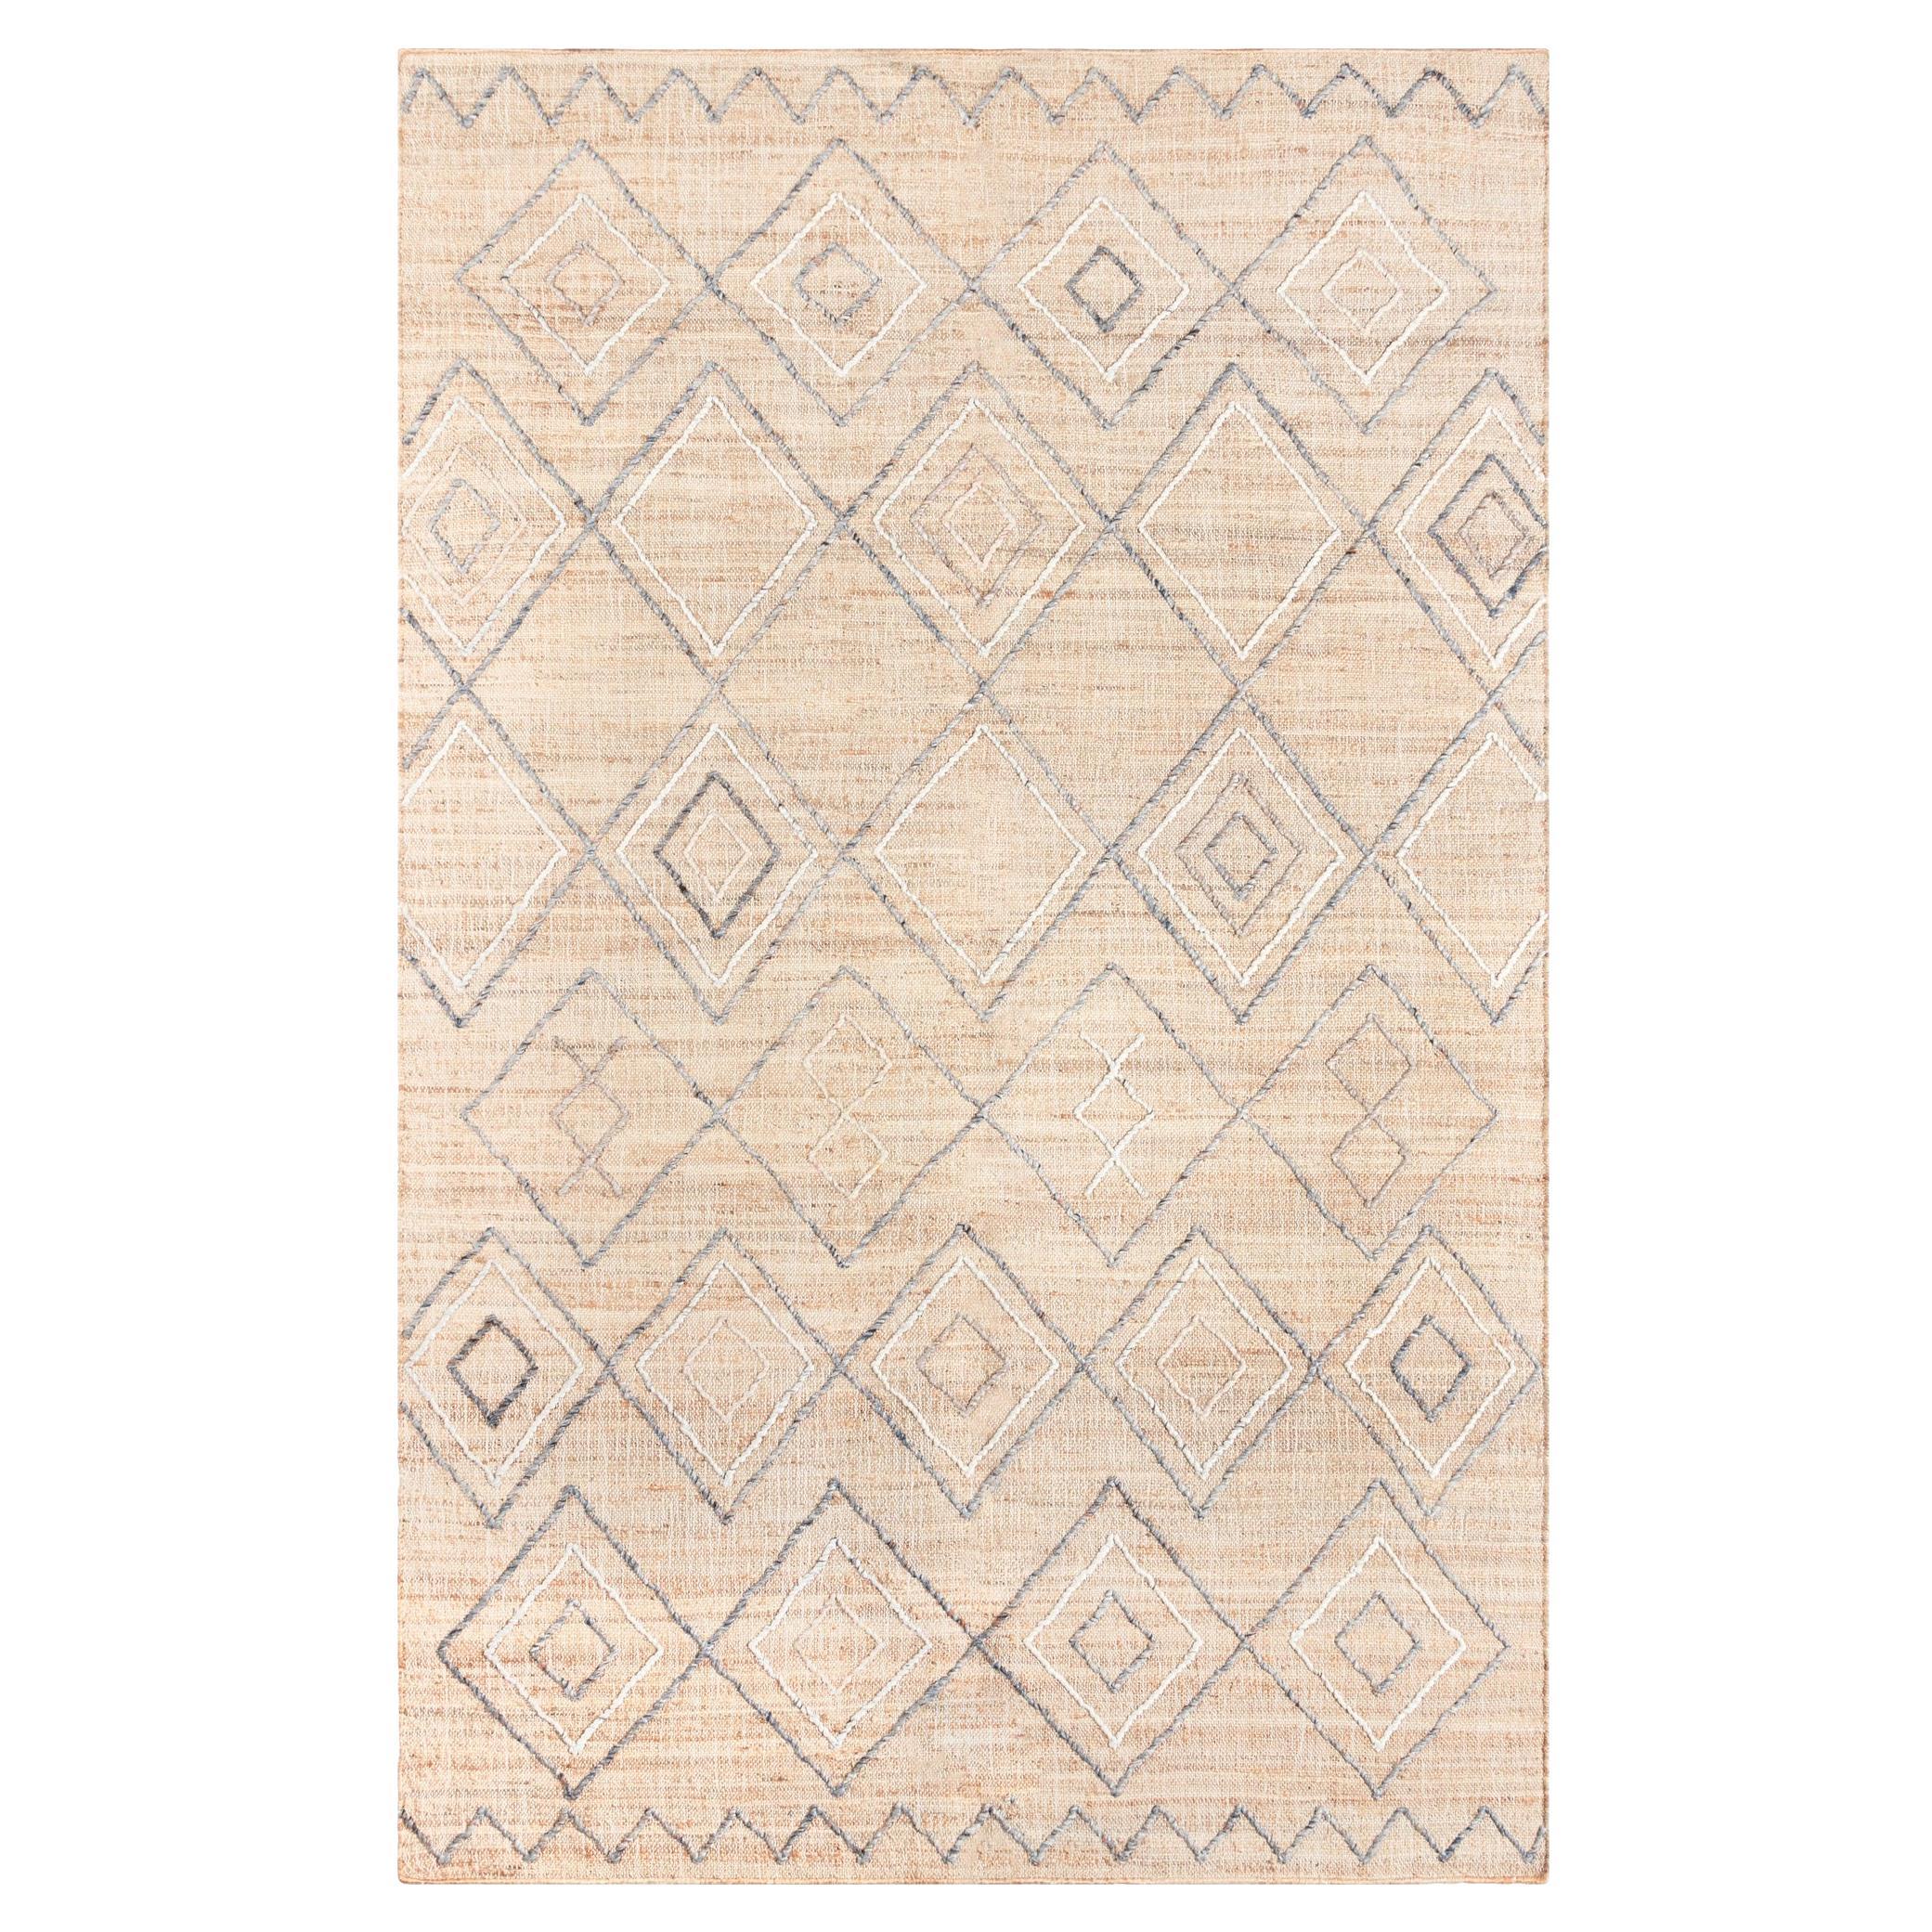 “Argan Oshipi” African Mud Cloth-Inspired Rug by Christiane Lemieux For Sale